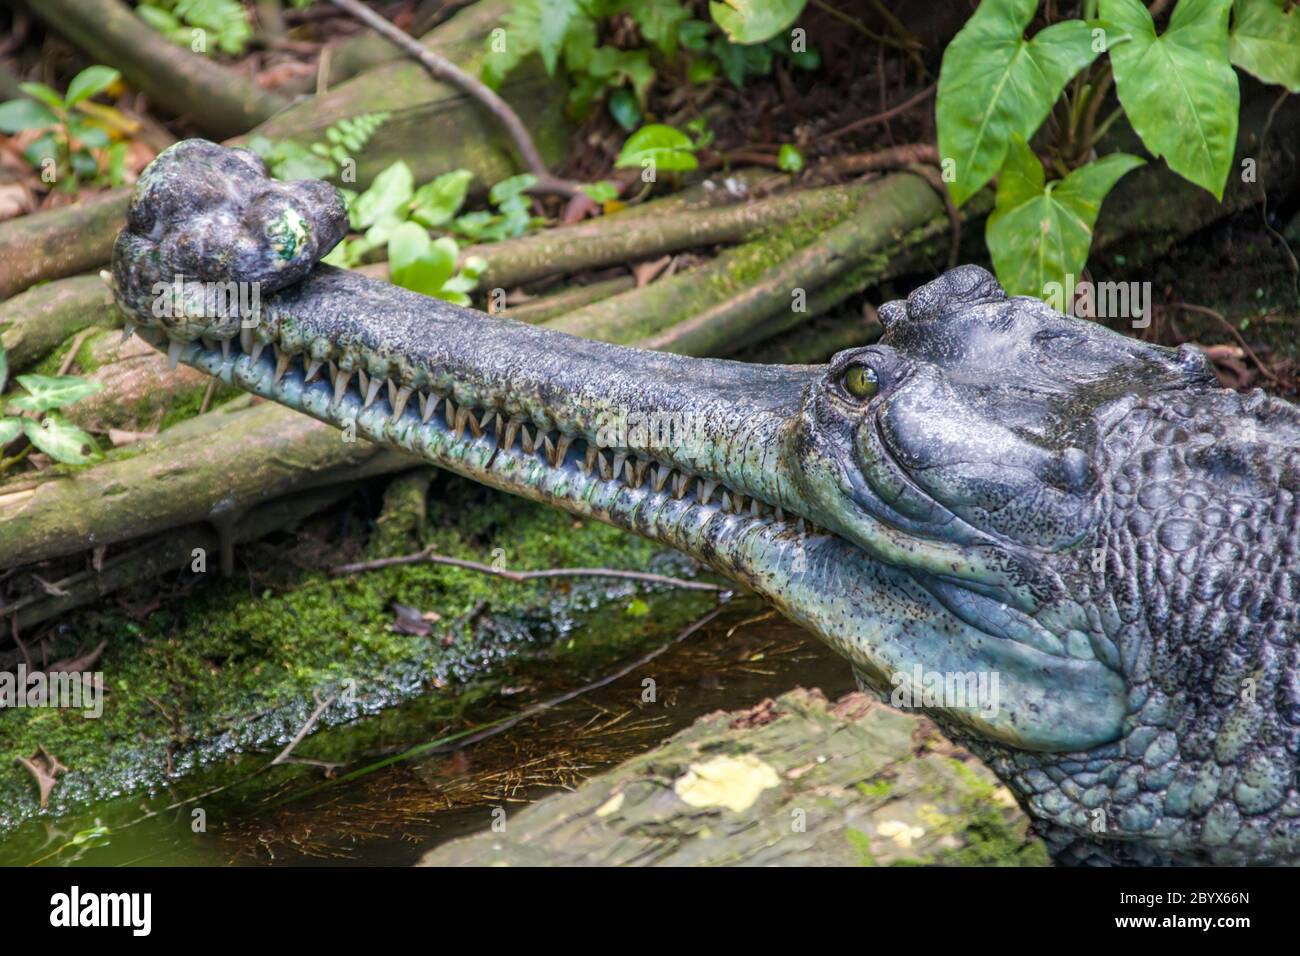 The gharial (Gavialis gangeticus) rests in the pond. It is a crocodilian in the family Gavialidae, native to sandy freshwater river banks in the plain Stock Photo